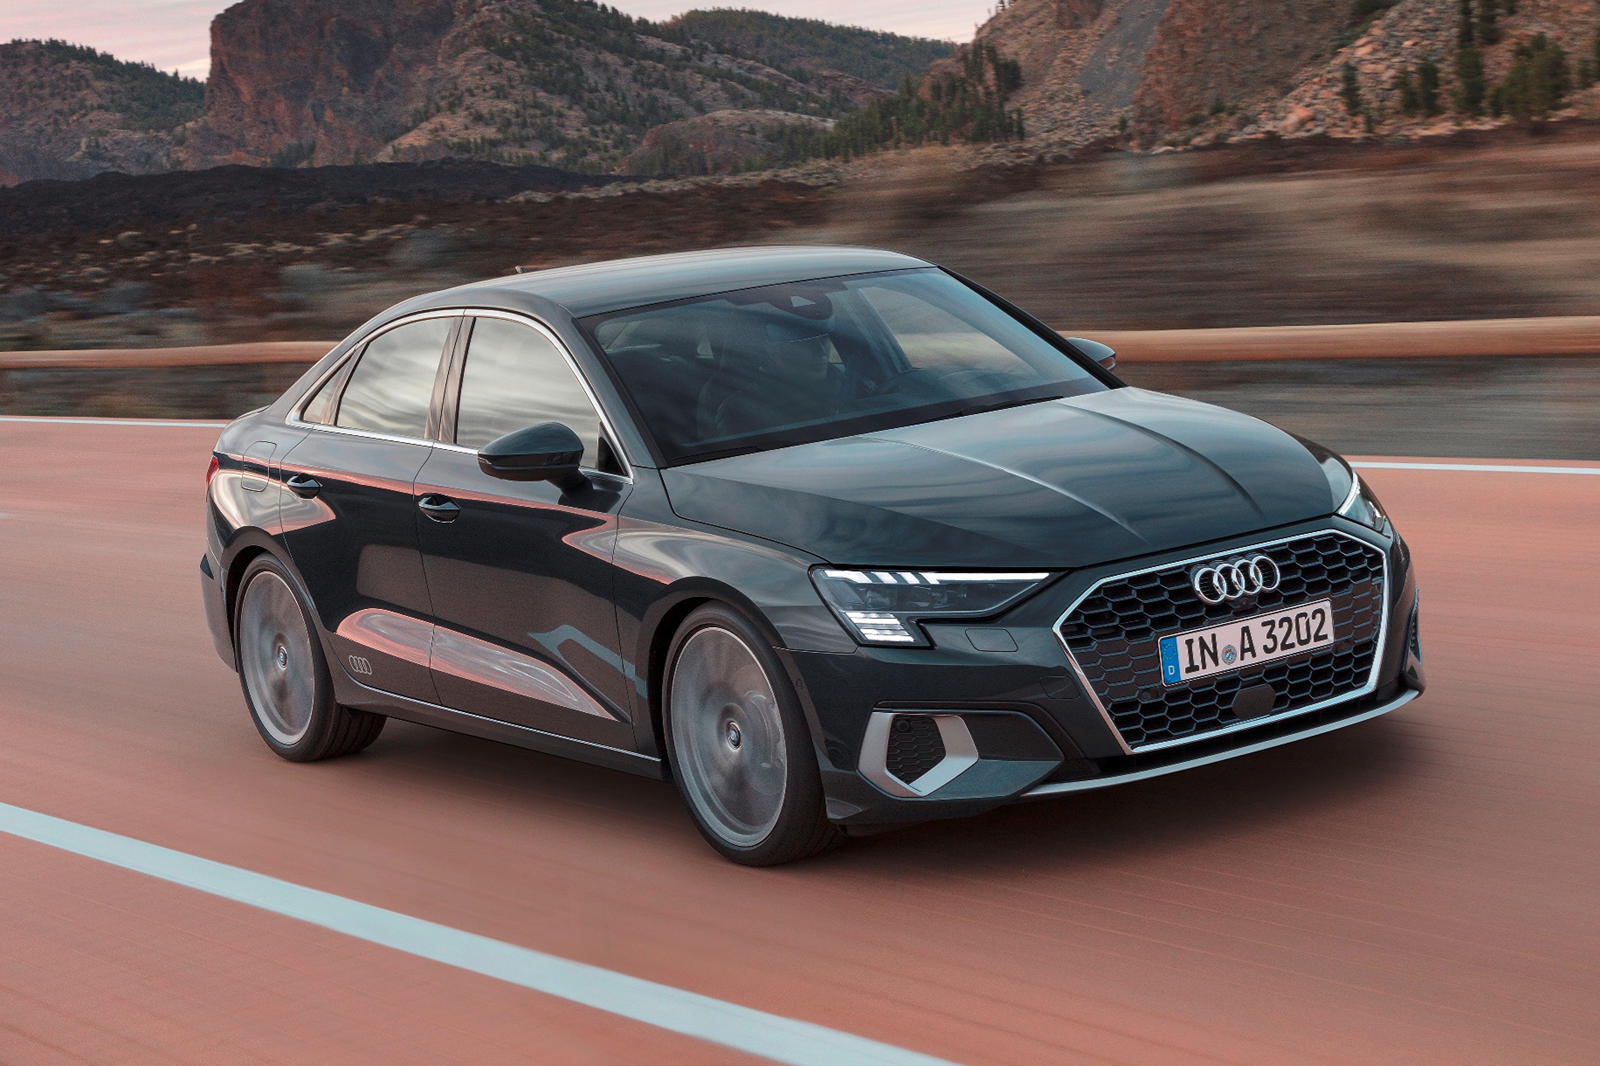 2022 Audi A3 Sedan Coming With Sharper Styling And Upgraded Tech | CarBuzz